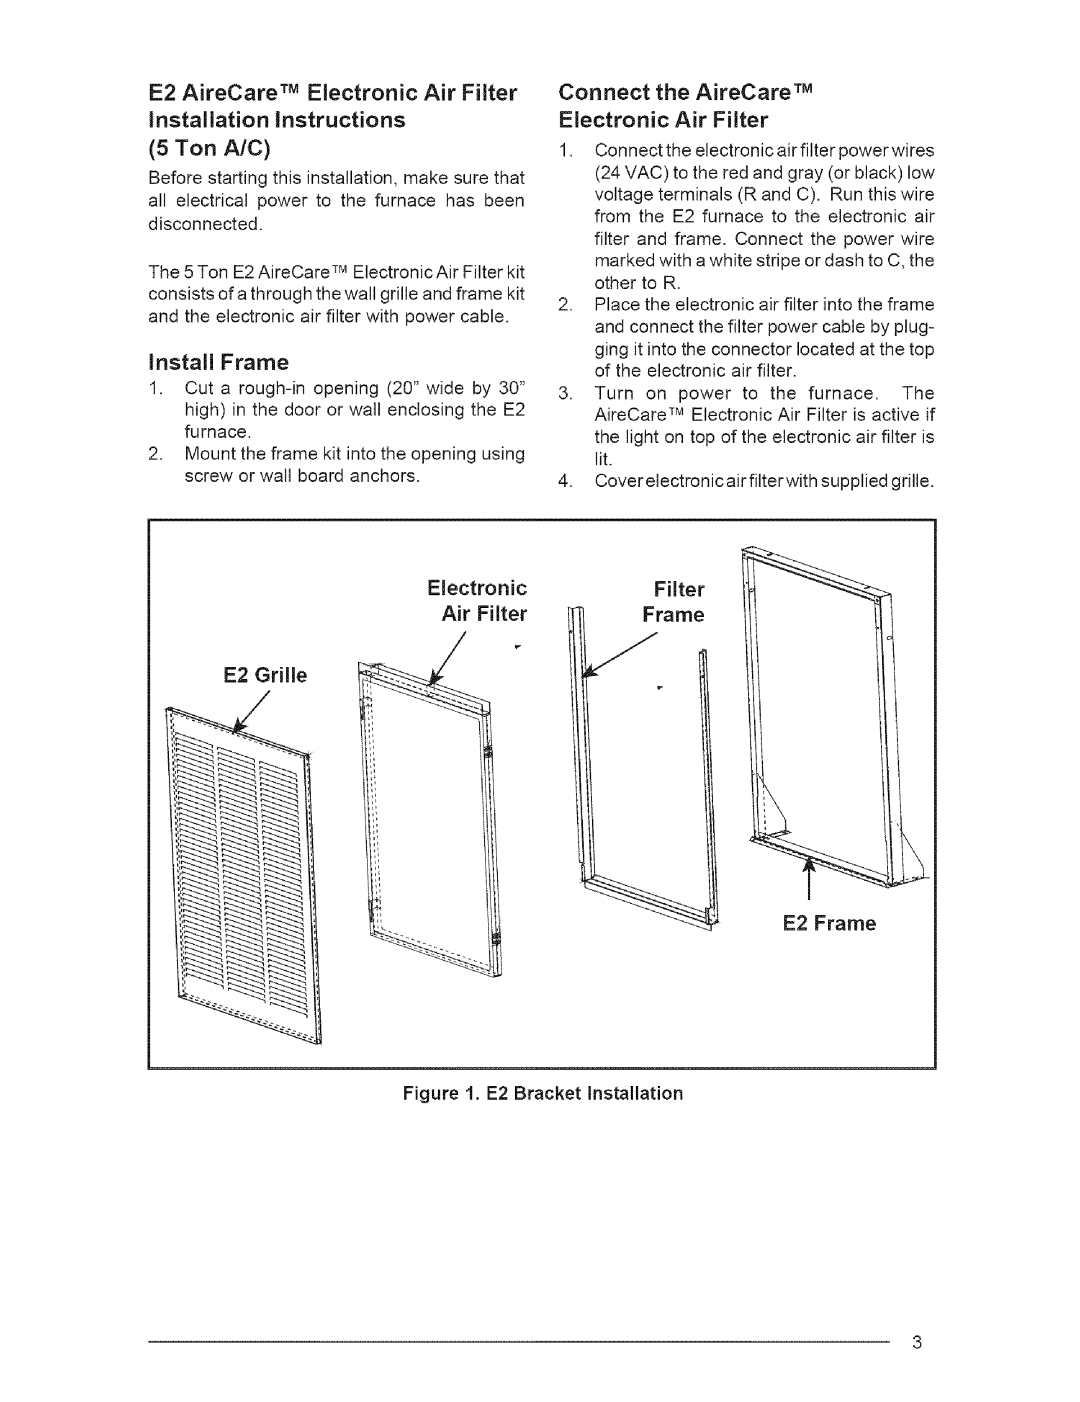 Nordyne 707831C E2 AireCare TM Electronic Air Filter, Installation Instructions 5 Ton A/C, Install Frame 